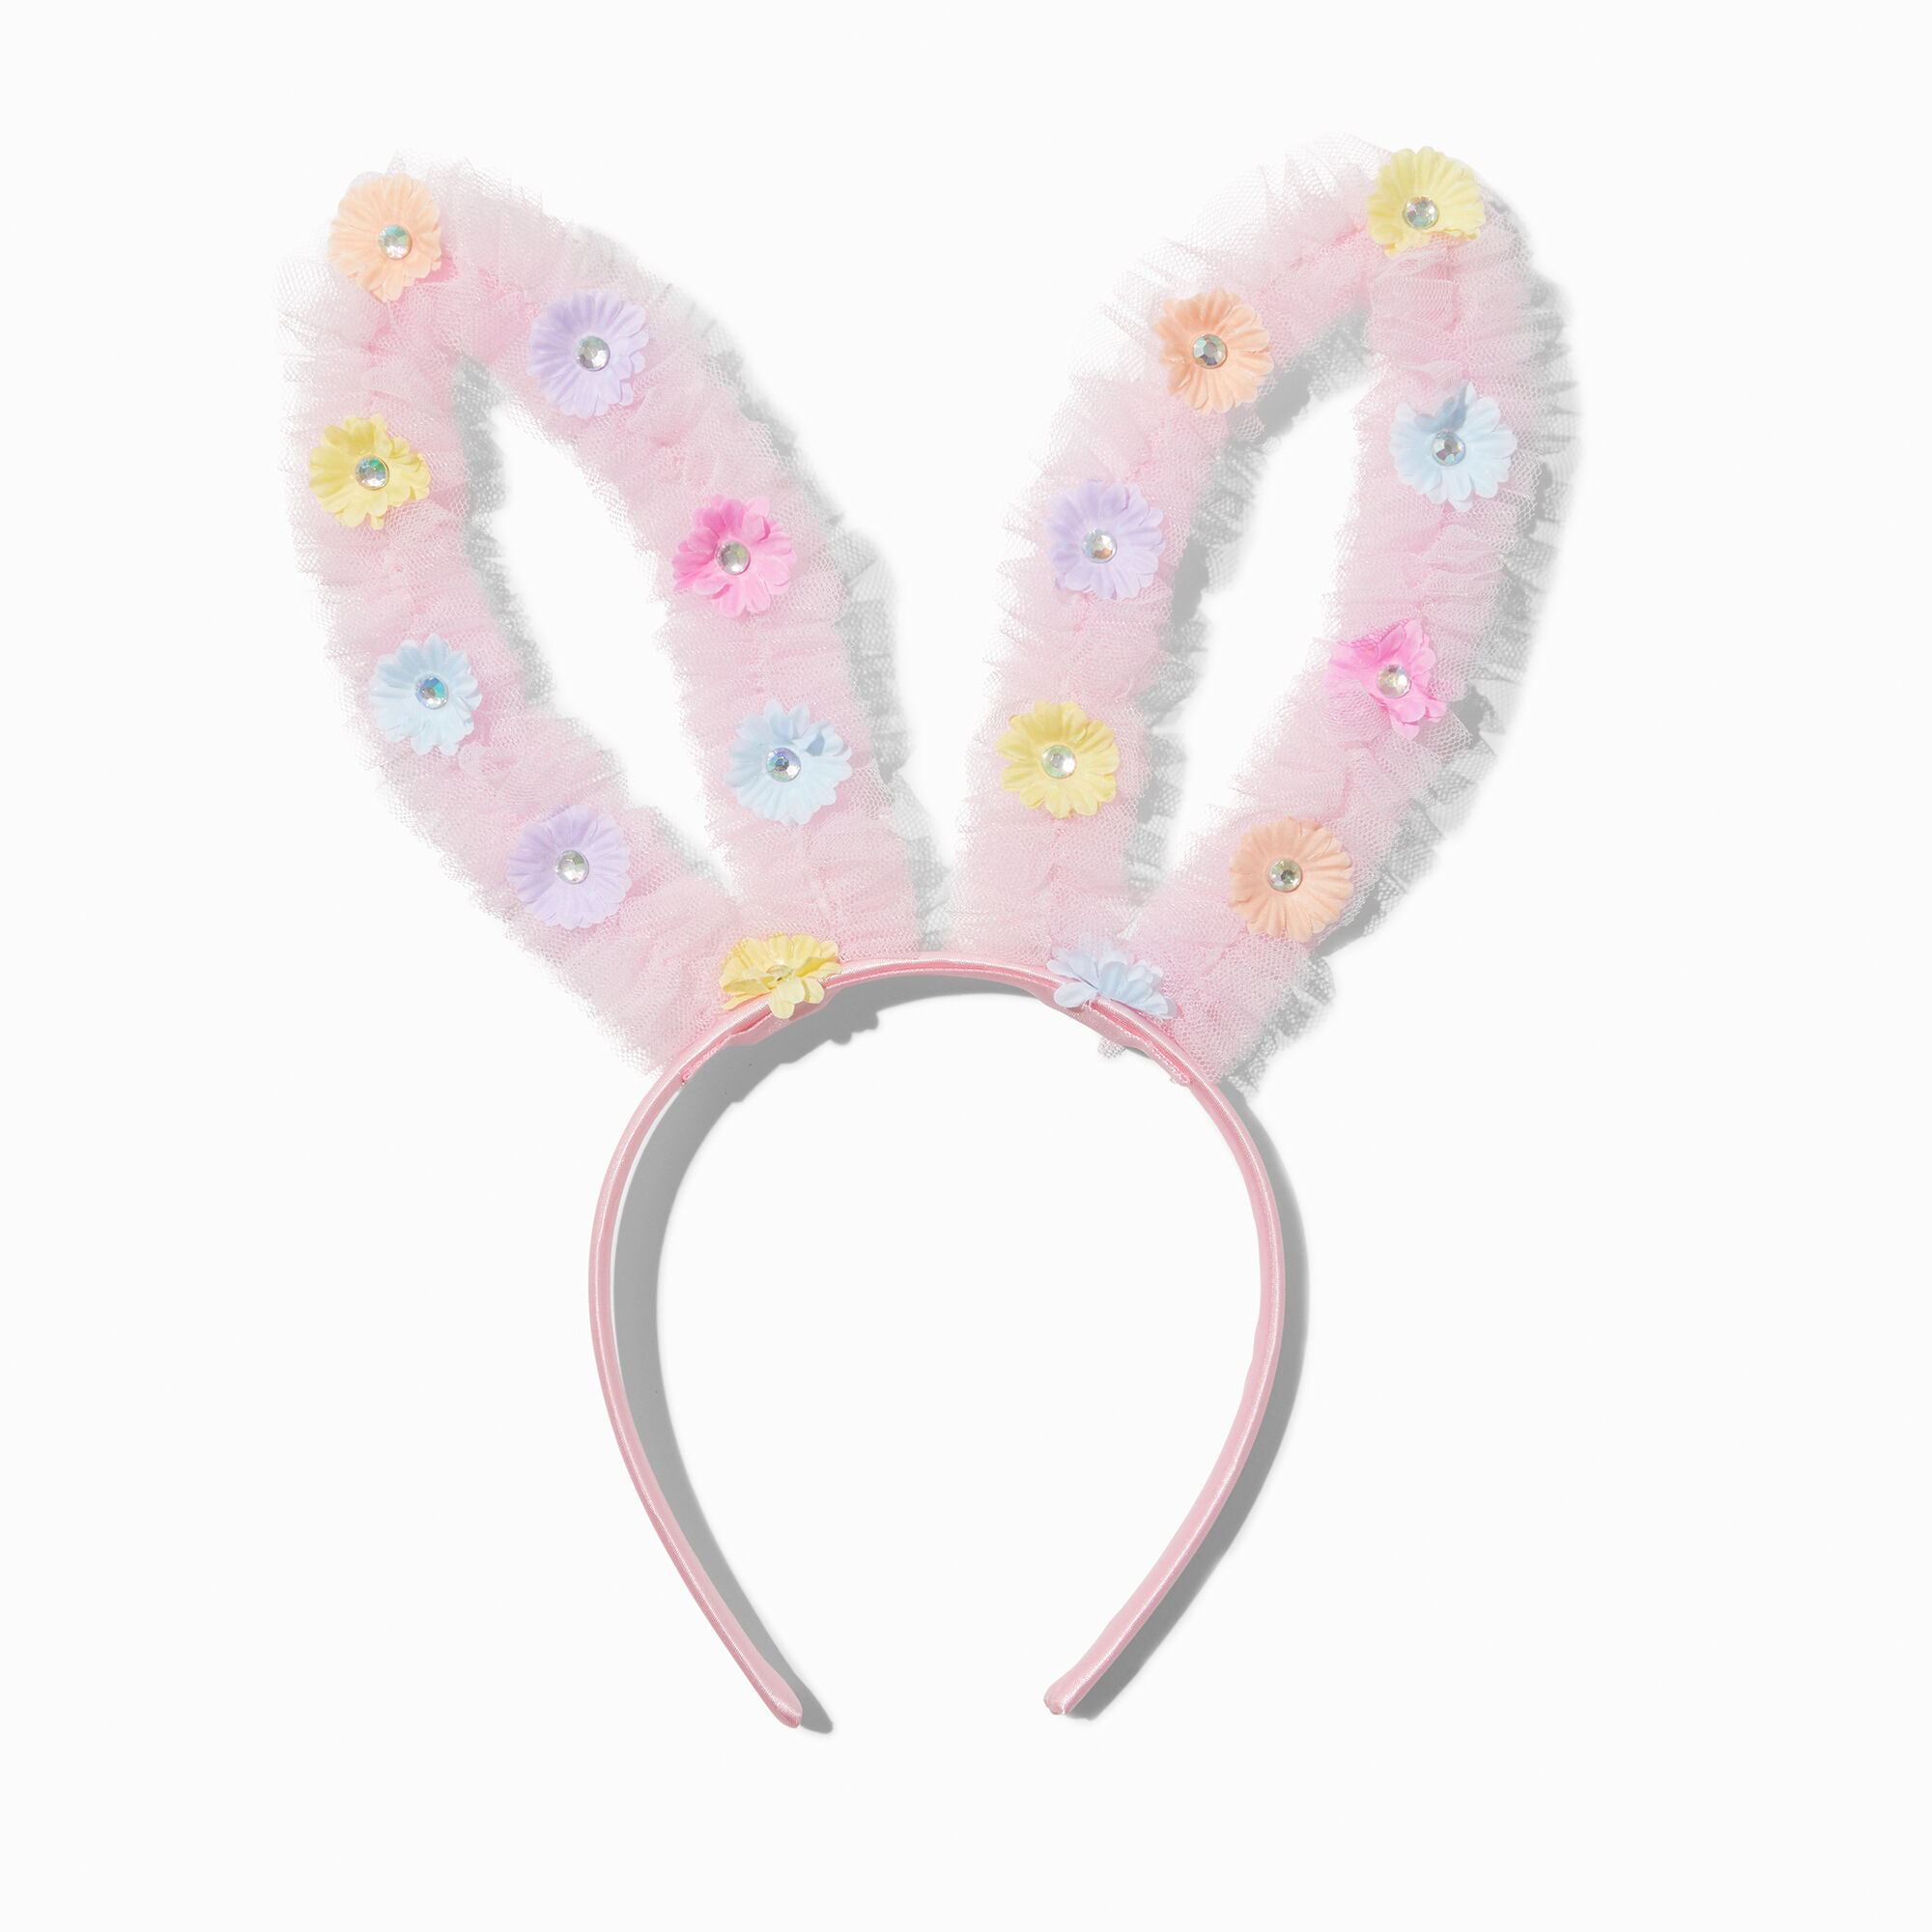 View Claires Spring Daisies Plush Bunny Ears Headband Pink information